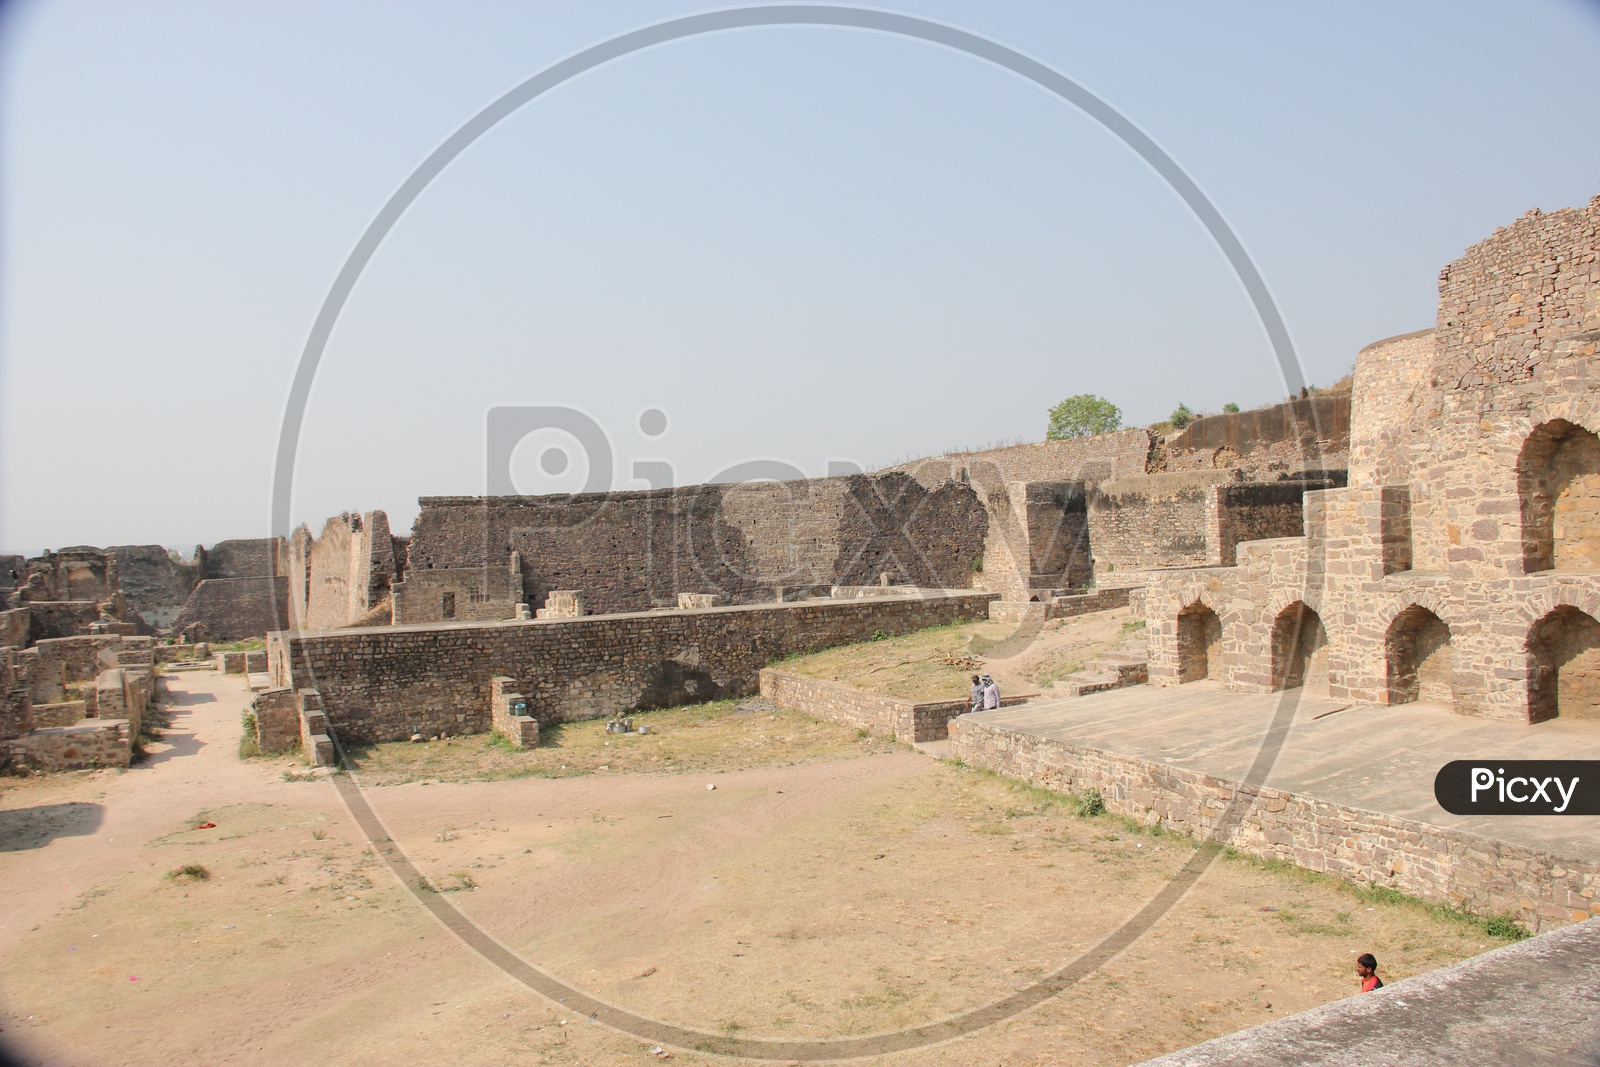 Old Ruins of Walls In Golconda Fort